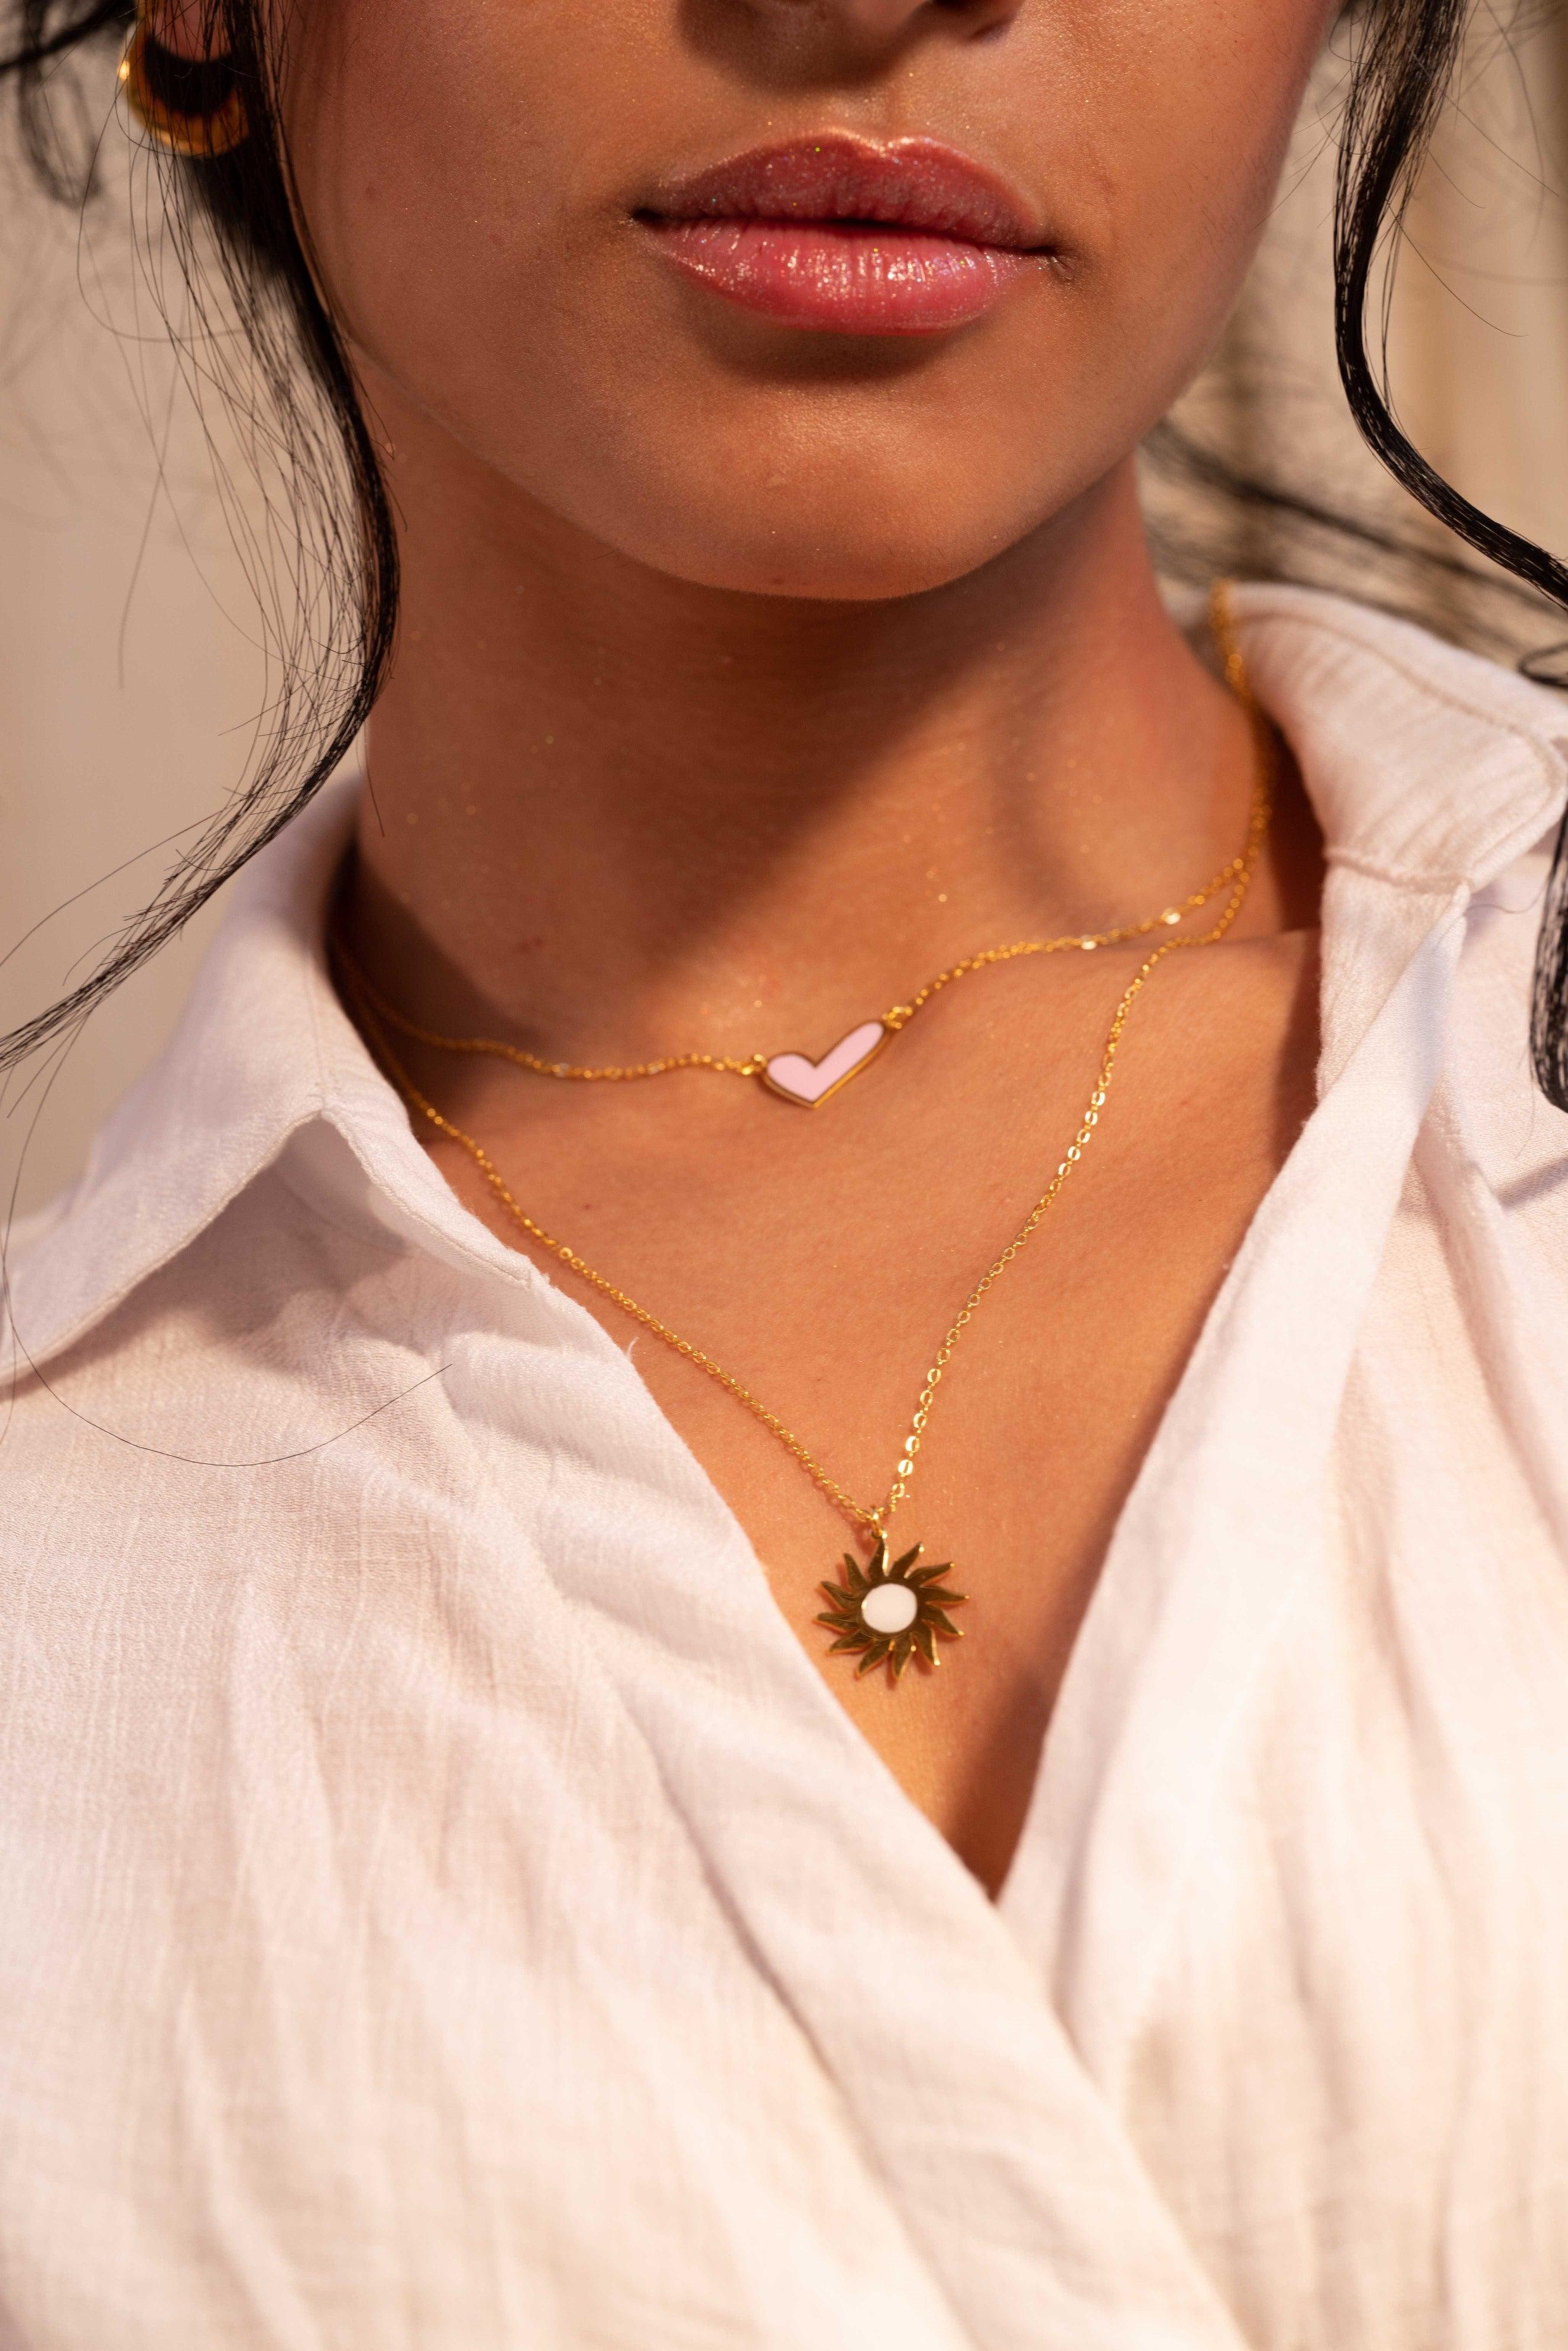 Heart With Sun Necklace - Yshmk